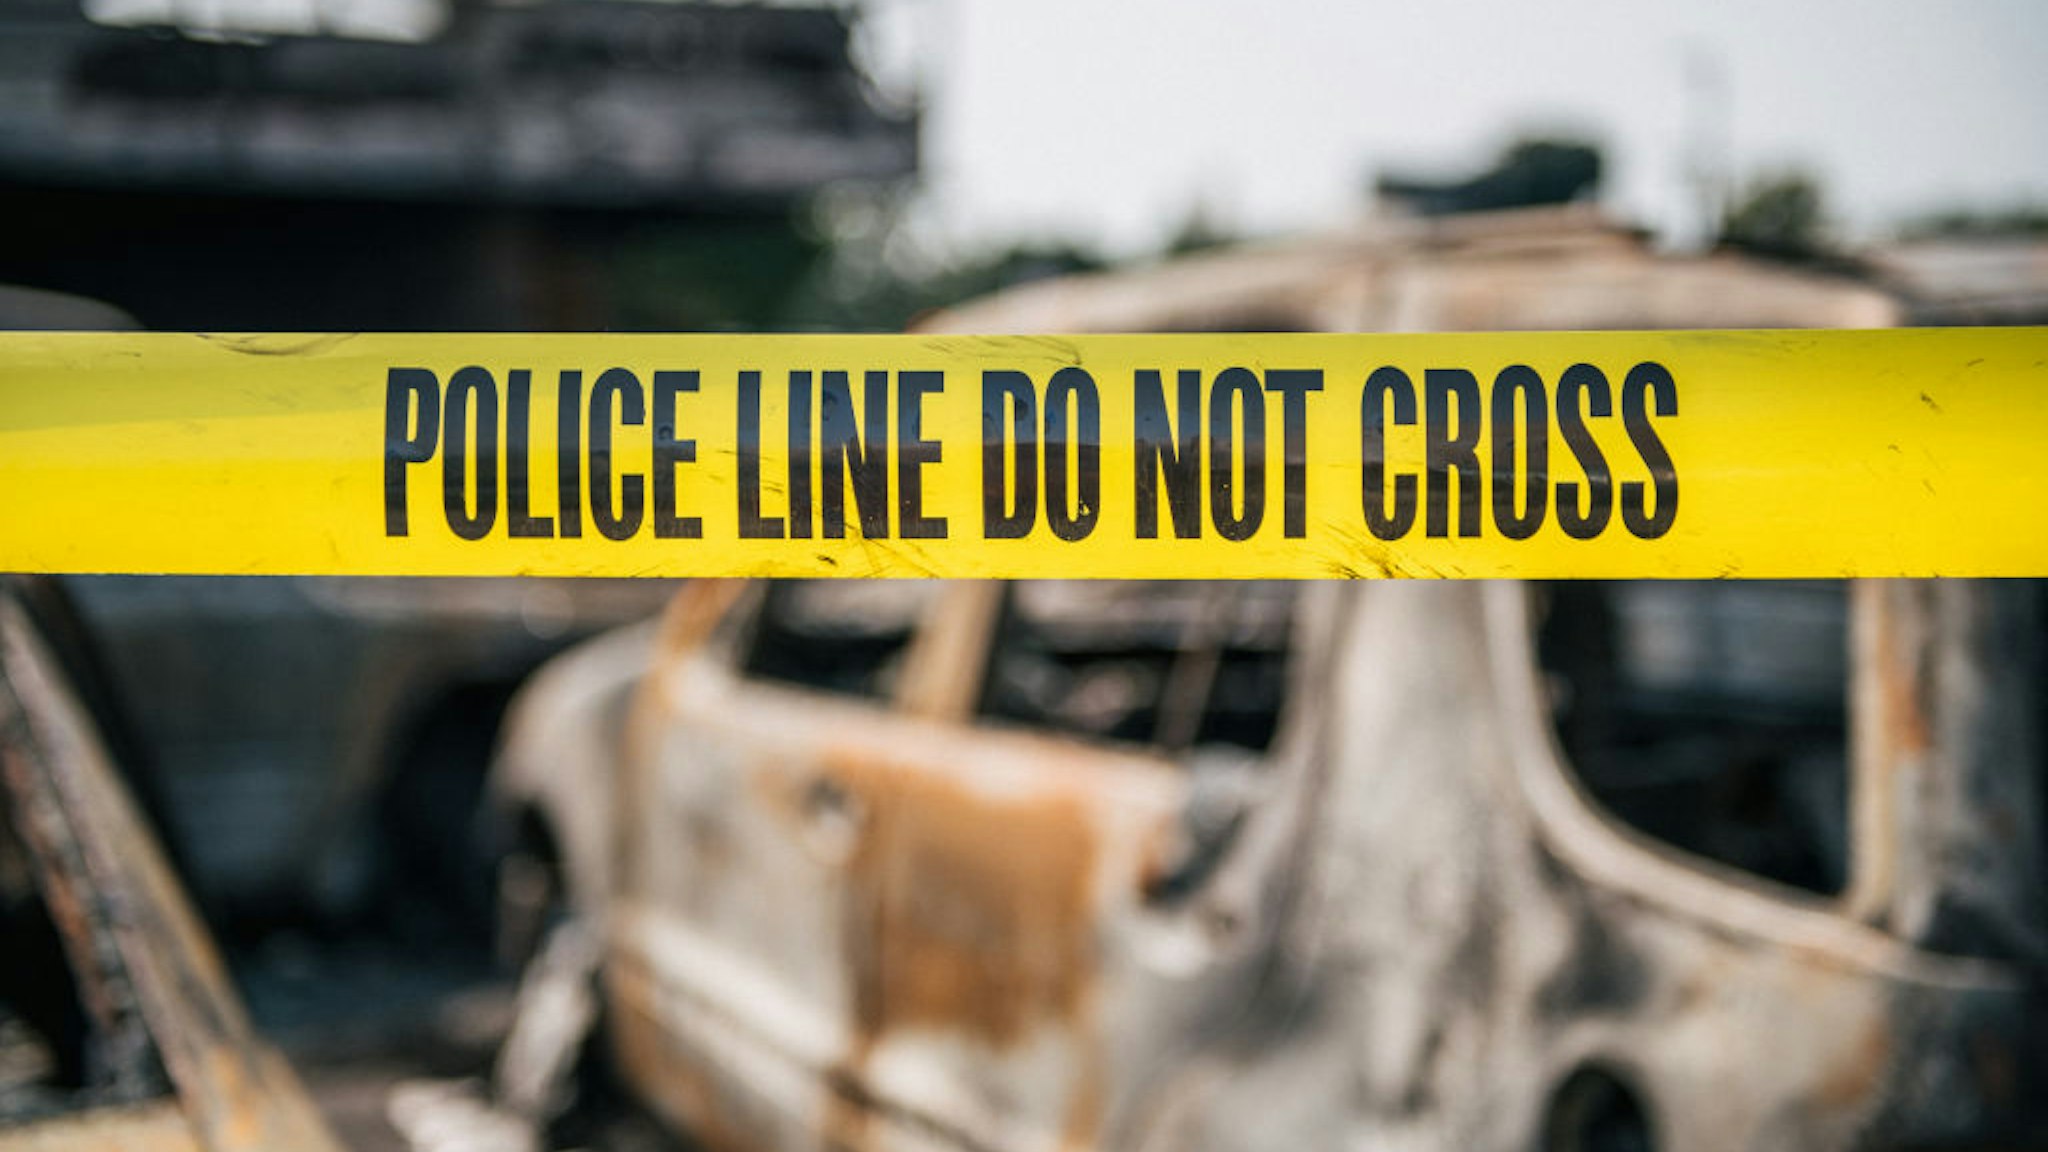 KENOSHA, WI - AUGUST 24: Caution tape at a burned down used car lot on August 24, 2020 in Kenosha, Wisconsin. A night of civil unrest occurred after the shooting of Jacob Blake, 29, on August 23. Blake was shot multiple times in the back by Wisconsin police officers after attempting to enter into the drivers side of a vehicle. (Photo by Brandon Bell/Getty Images)